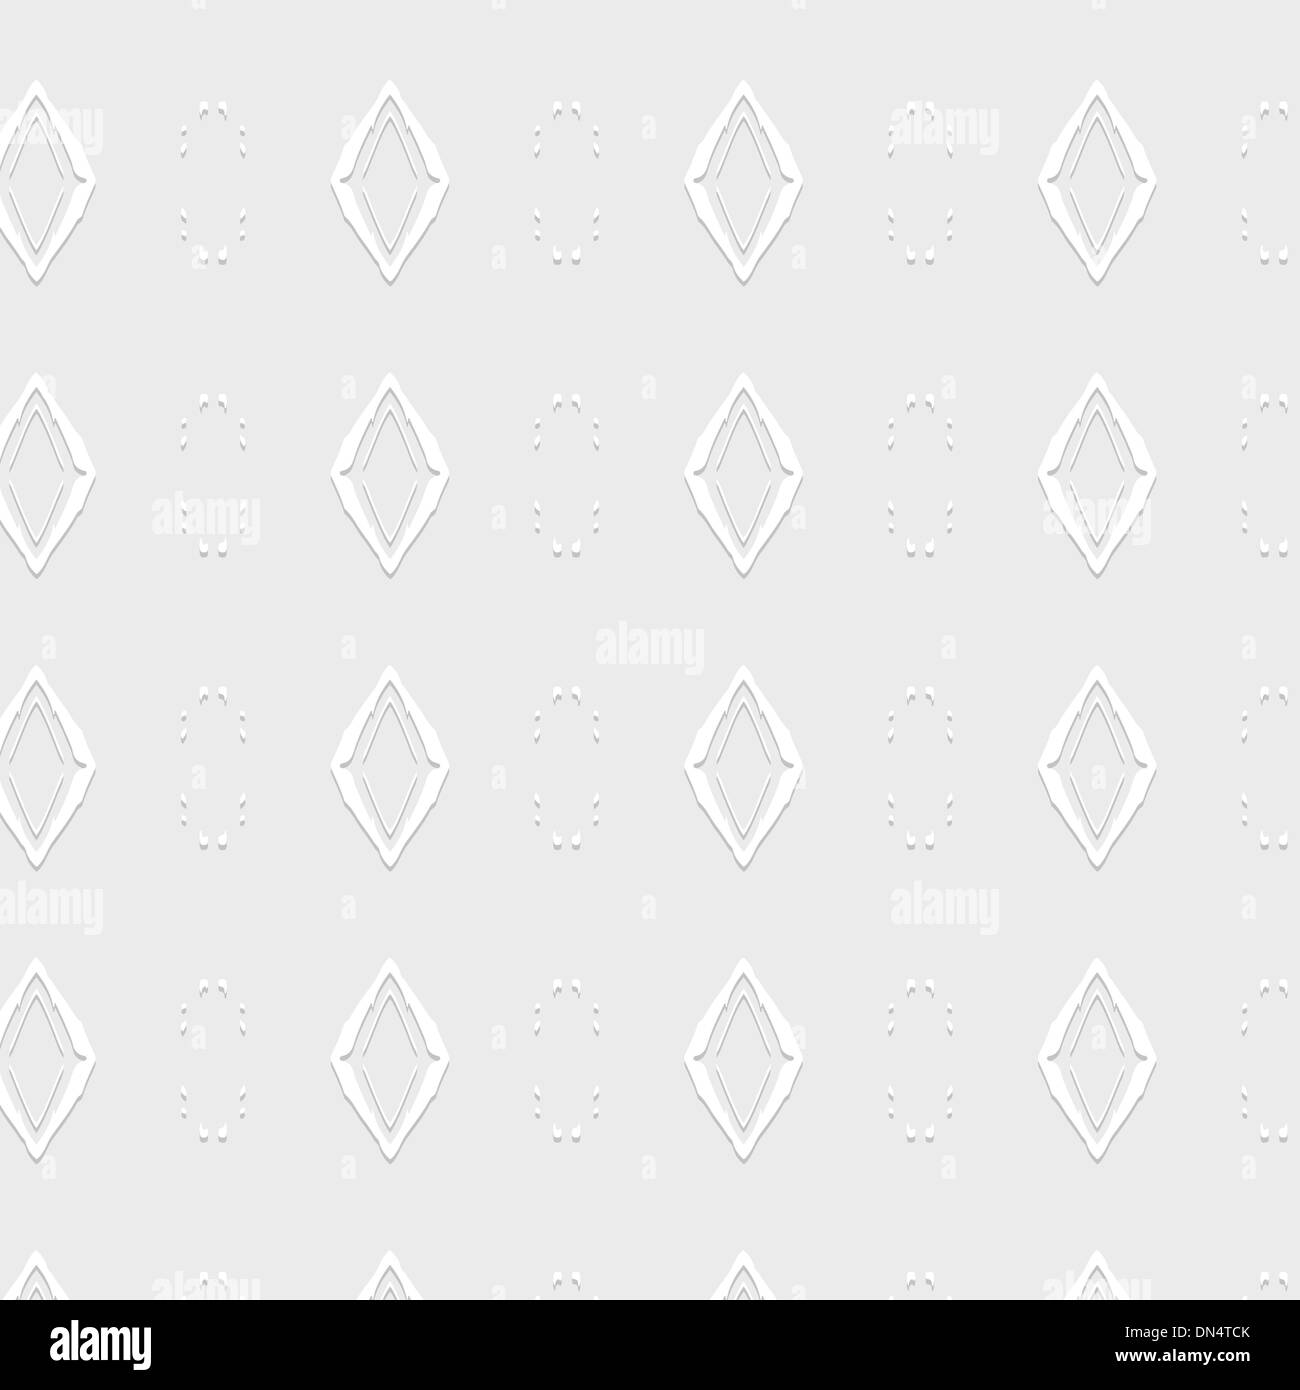 Antique seamless pattern Stock Vector